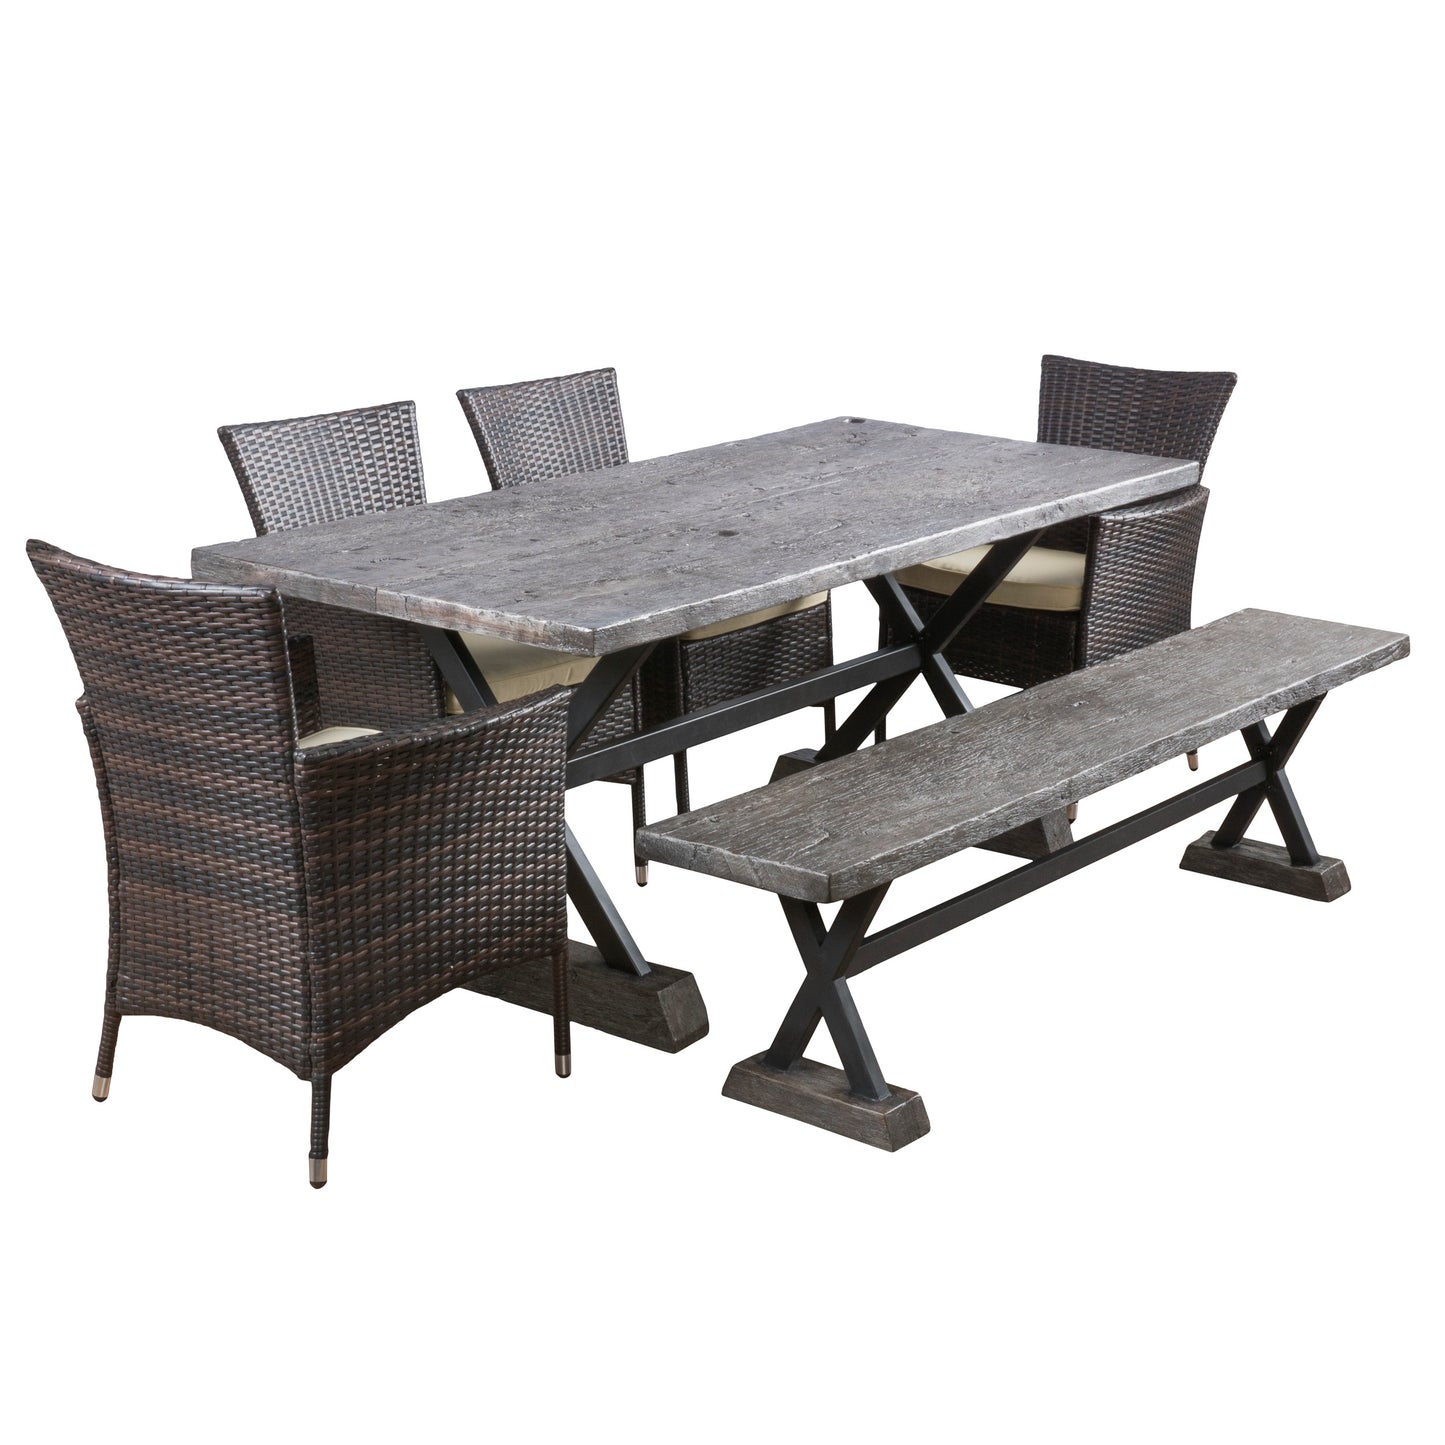 Remond Outdoor 6 Piece Lightweight Concrete Dining Set with Bench